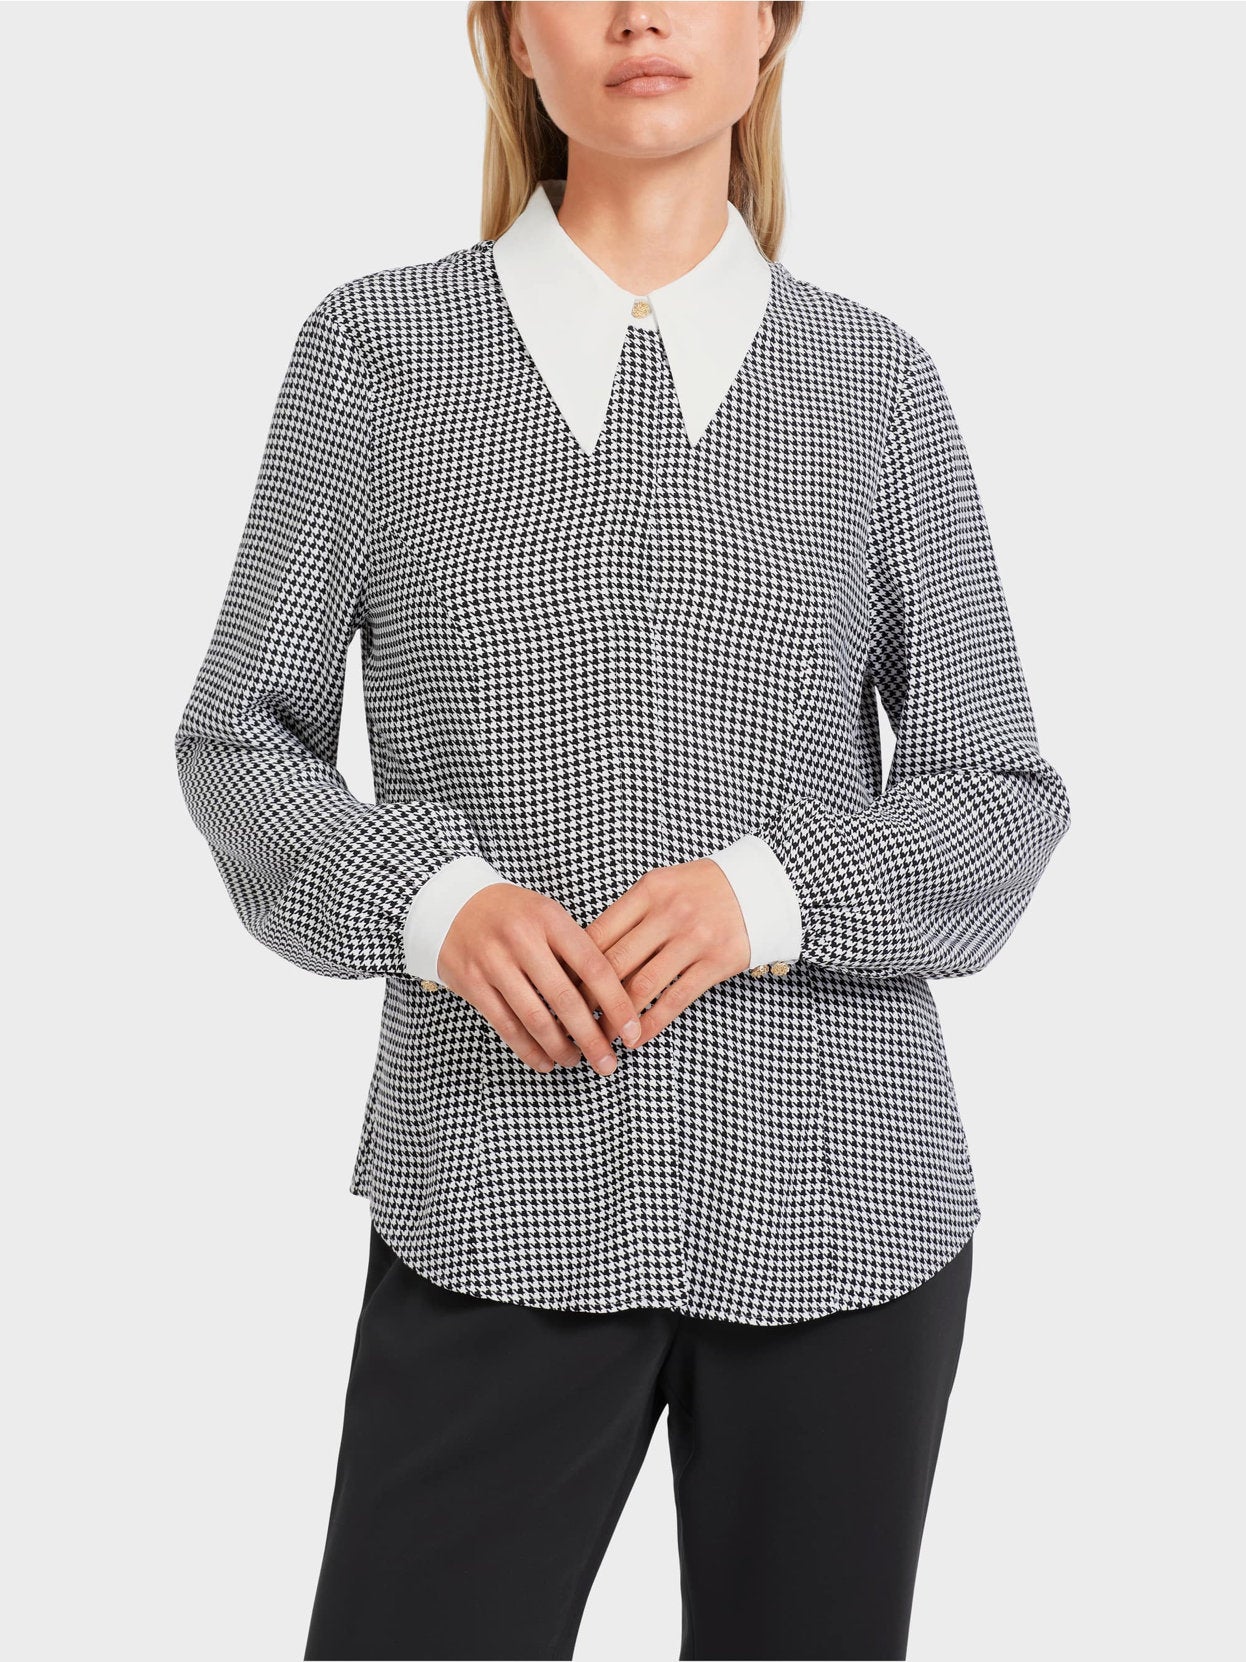 Viscose Blouse With Houndstooth Check_VC 51.34 W28_190_04